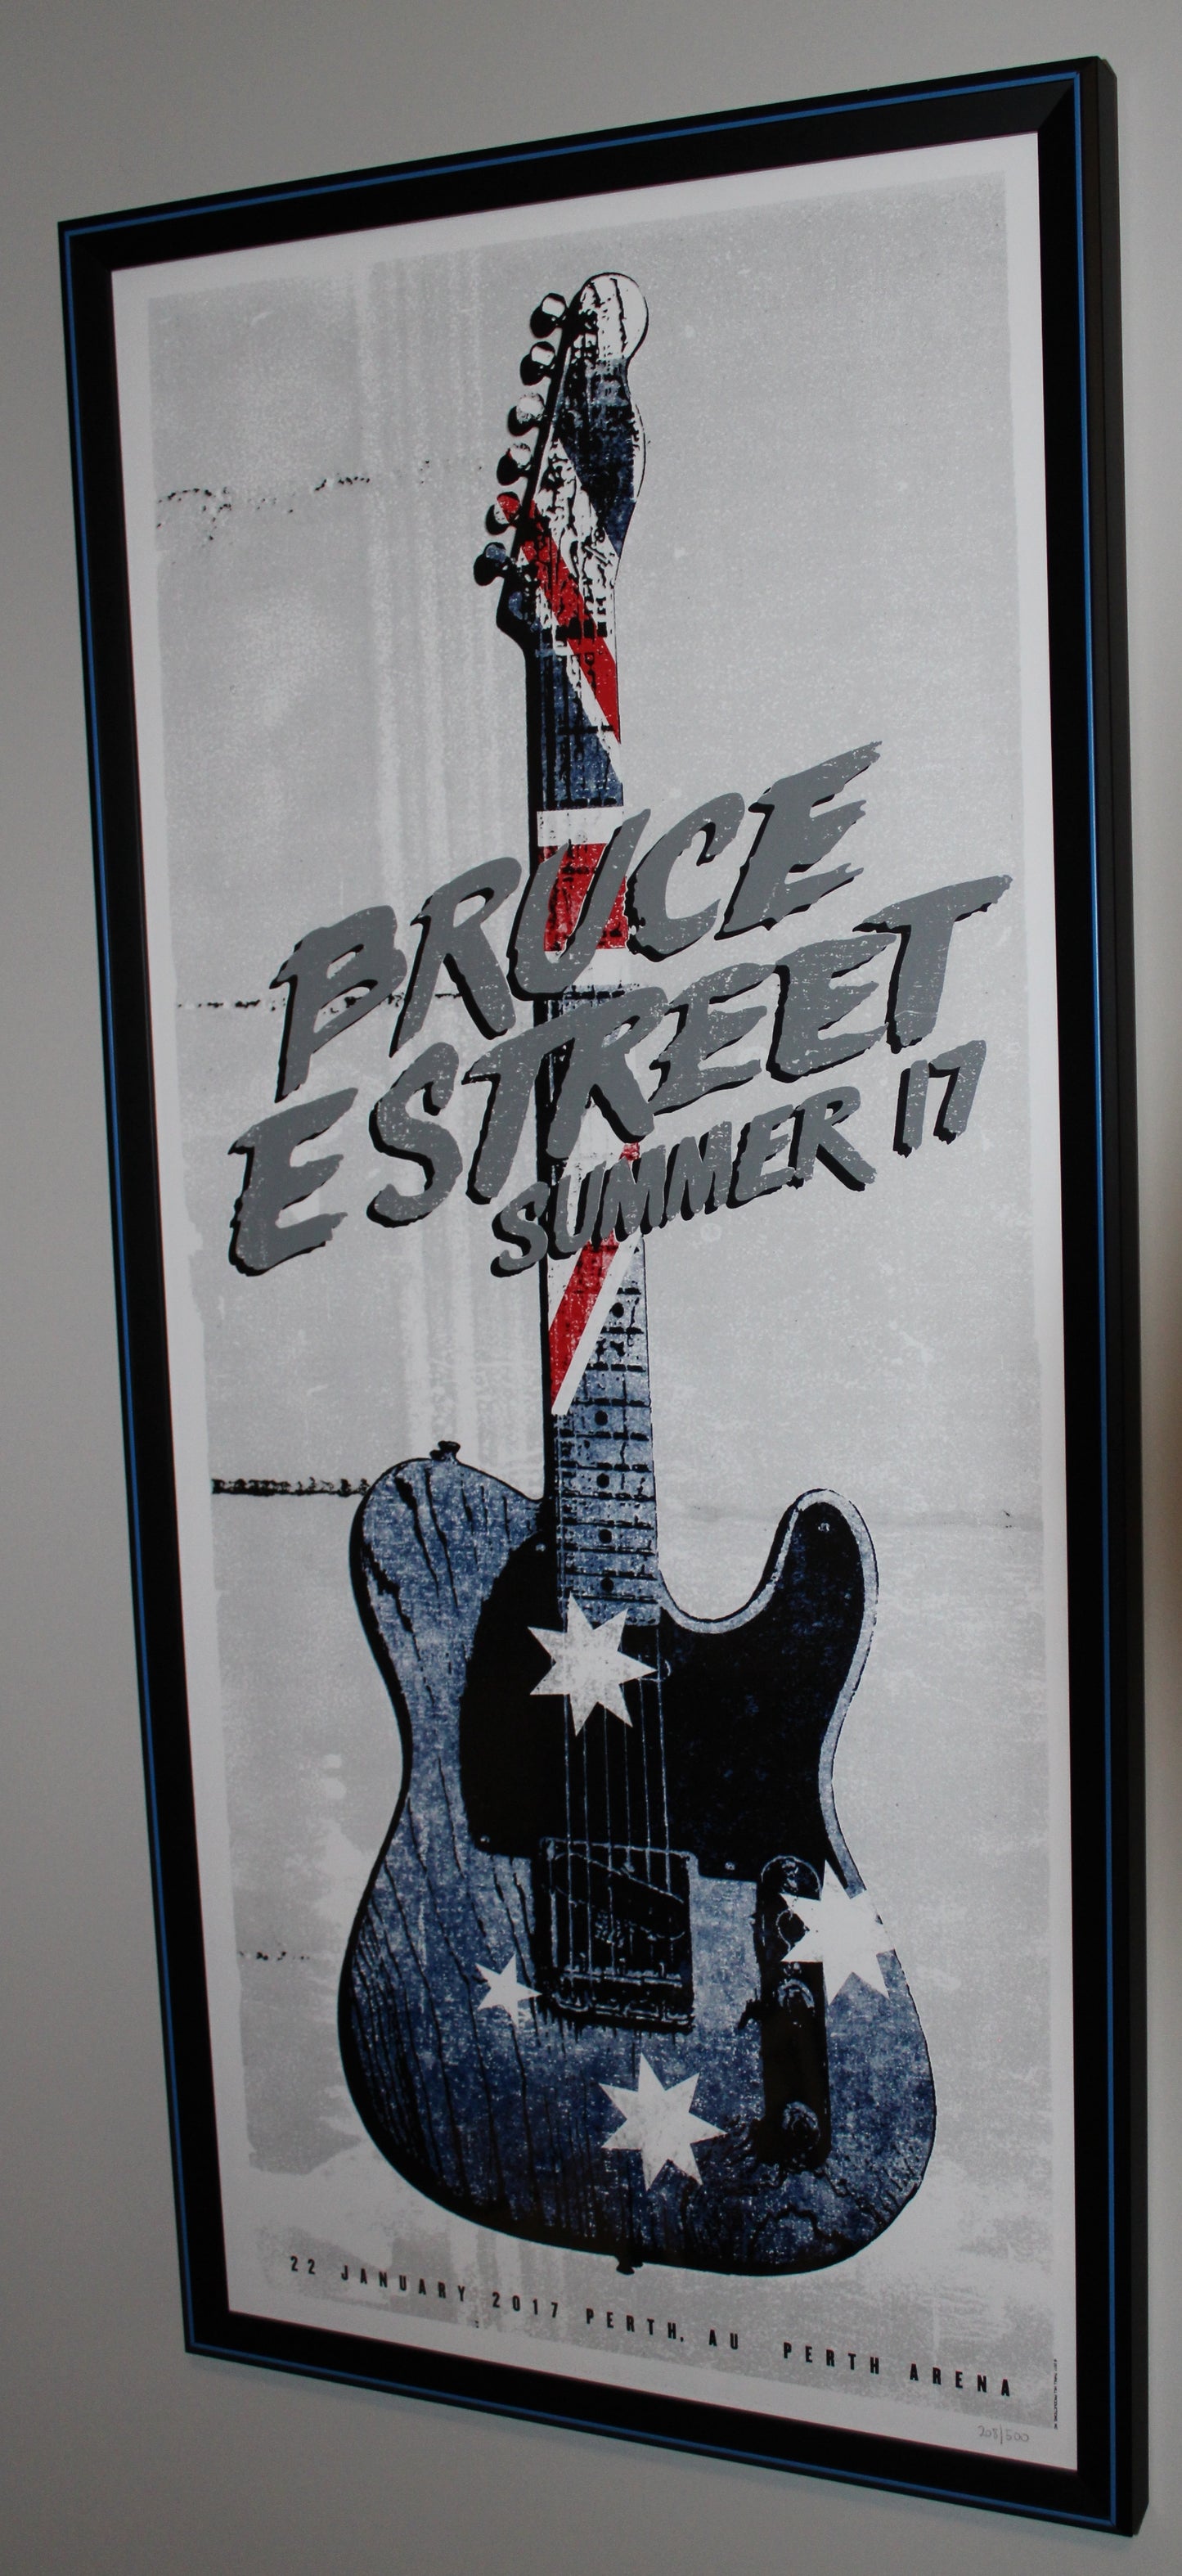 Bruce Springsteen - Original Lithograph - "Summer 2017" in Perth, AU - Final Shows of The River Tour - Collectible